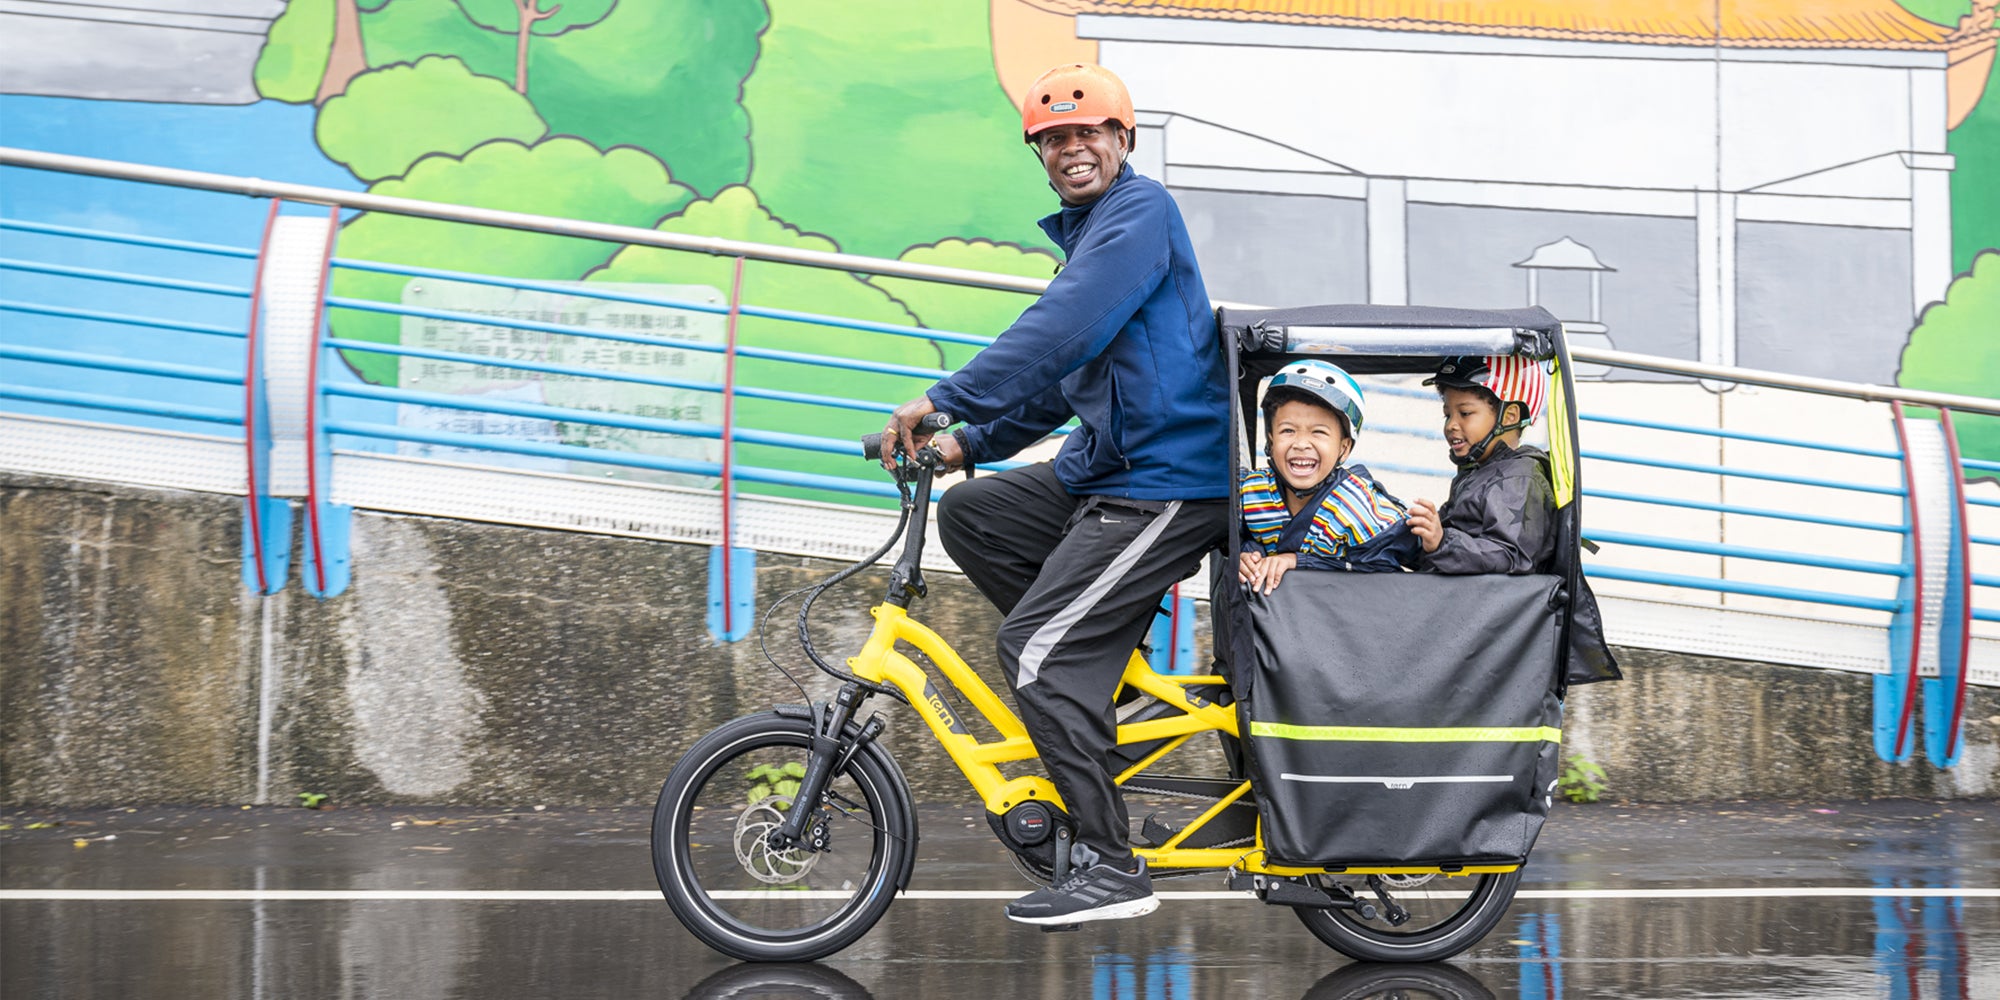 Man riding Tern GSD e-cargobike with two kids on back in covered compartment